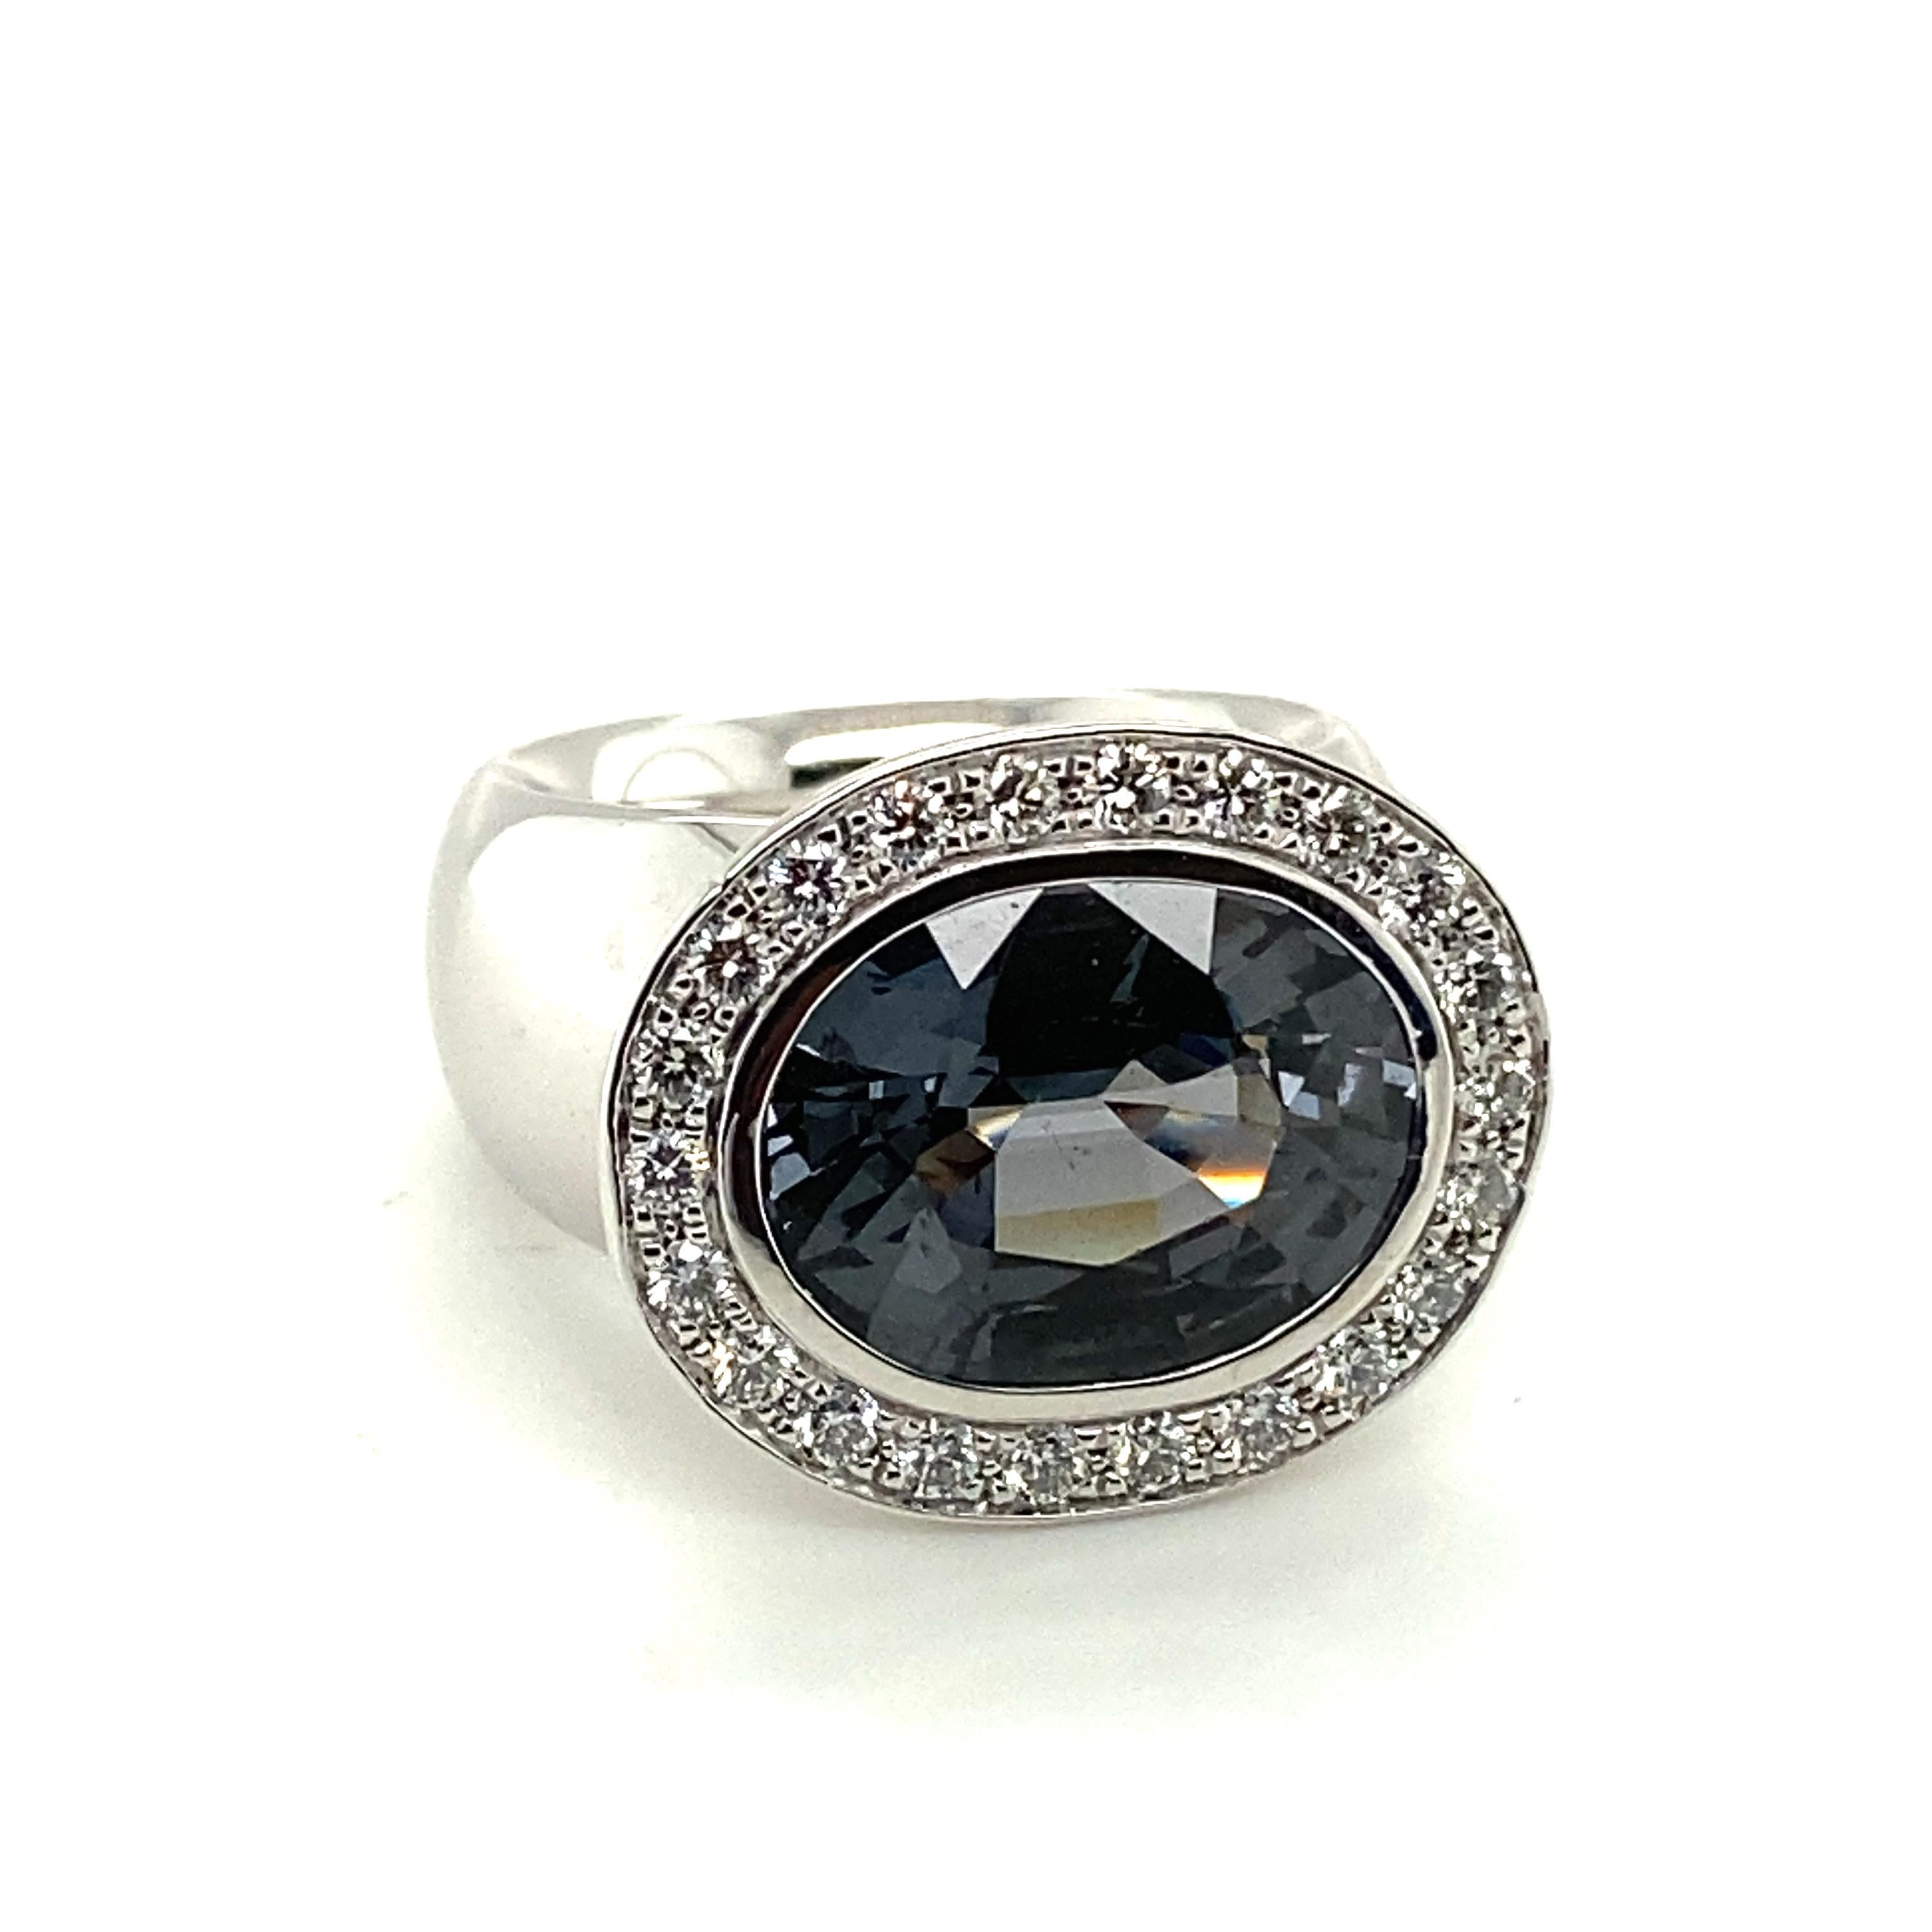 This beautiful handcrafted ring in 18 karat white gold enchants with an 8.84 carat oval-cut sparkling grey spinel. Its fire is further intensified with purple and blue sparkles. A truly unique gemstone!
The spinel is framed by 20 brilliant-cut